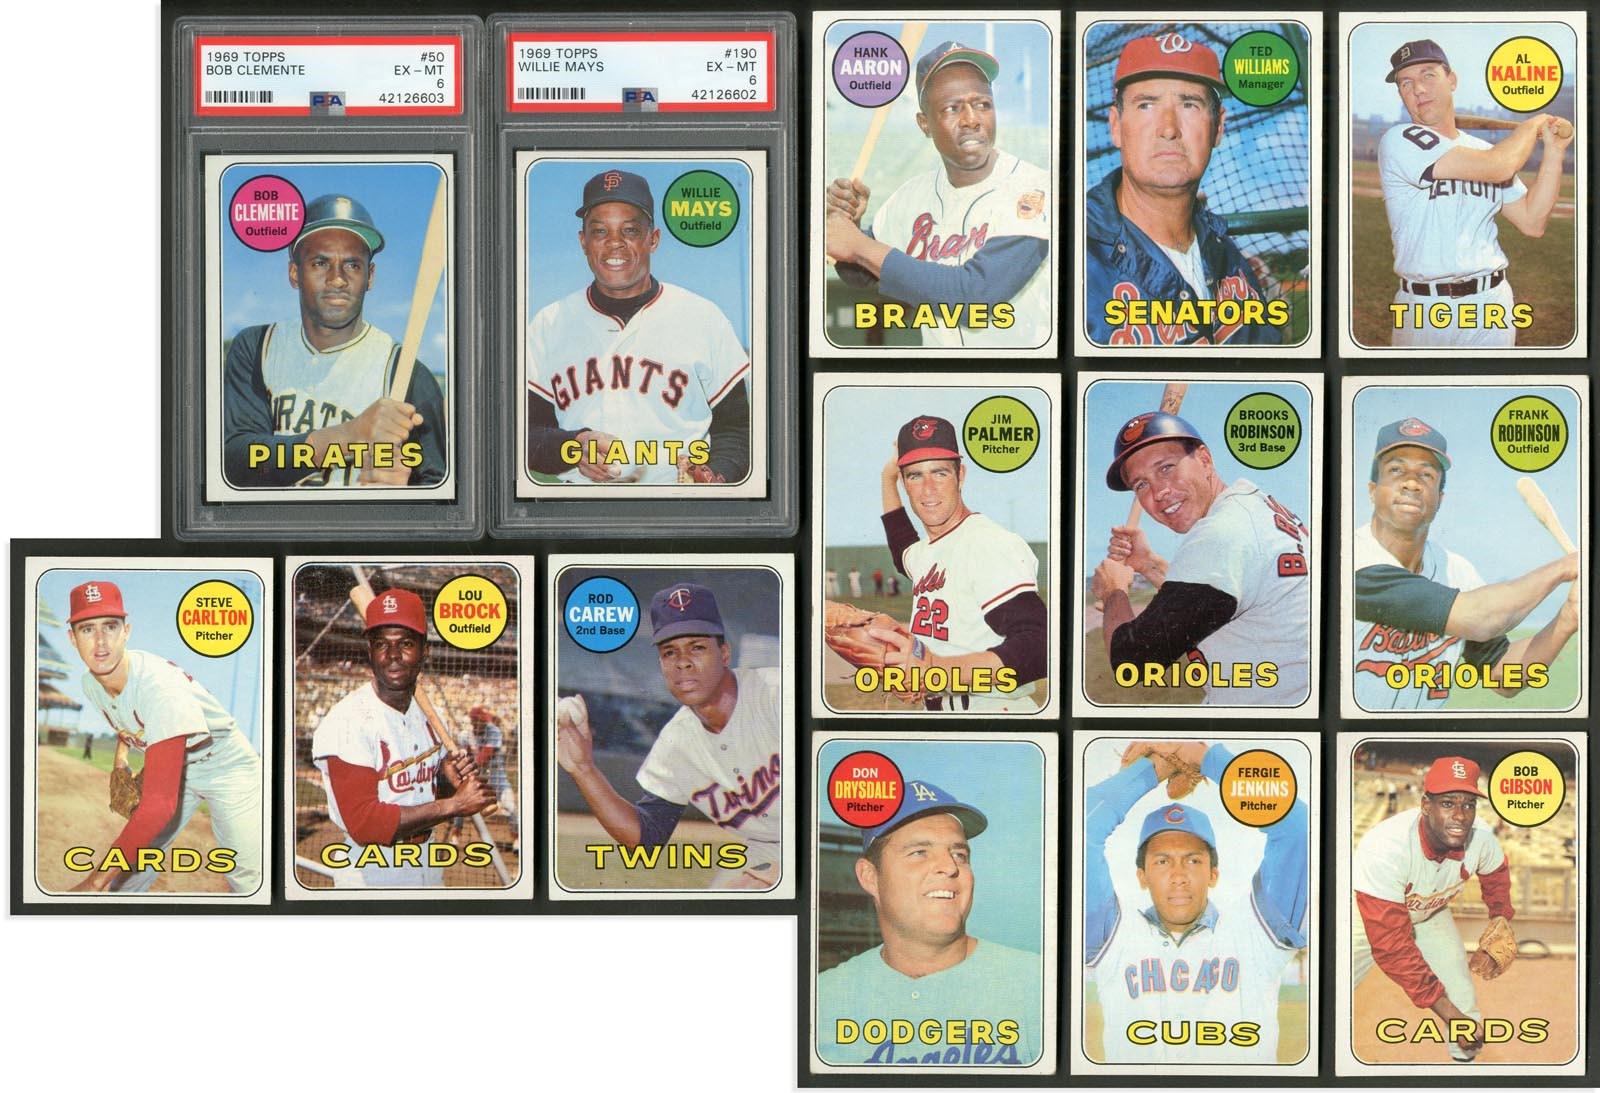 Baseball and Trading Cards - 1969 Topps Baseball Near Complete Set w/PSA Graded Mays & Clemente (661/664)